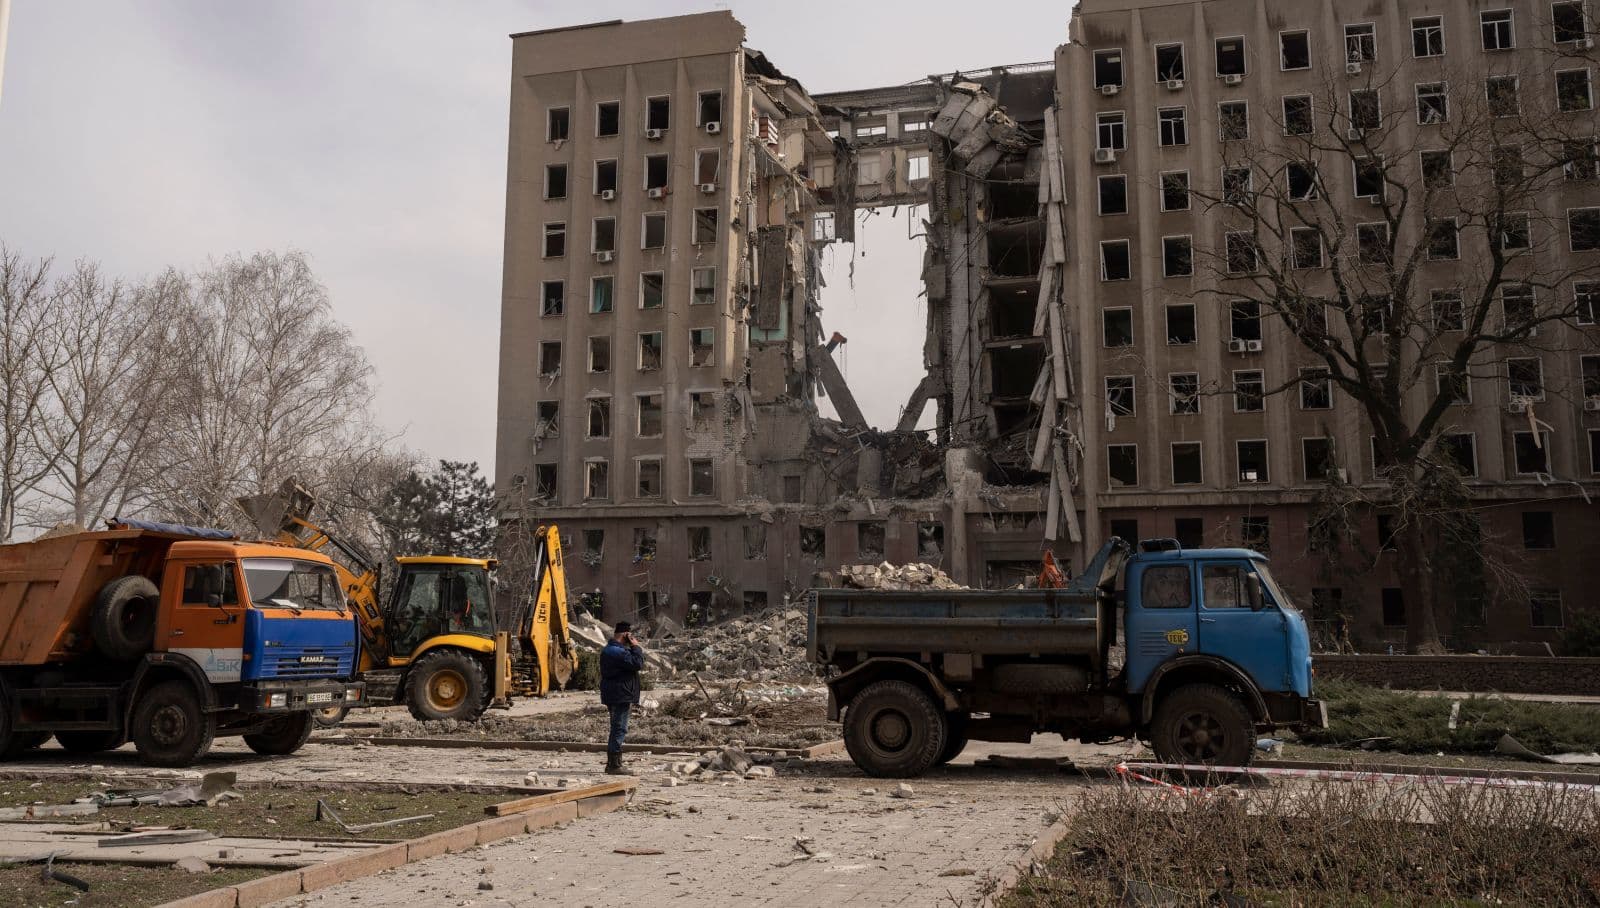 The regional government headquarters of Mykolaiv damaged after a Russian attack on March 29